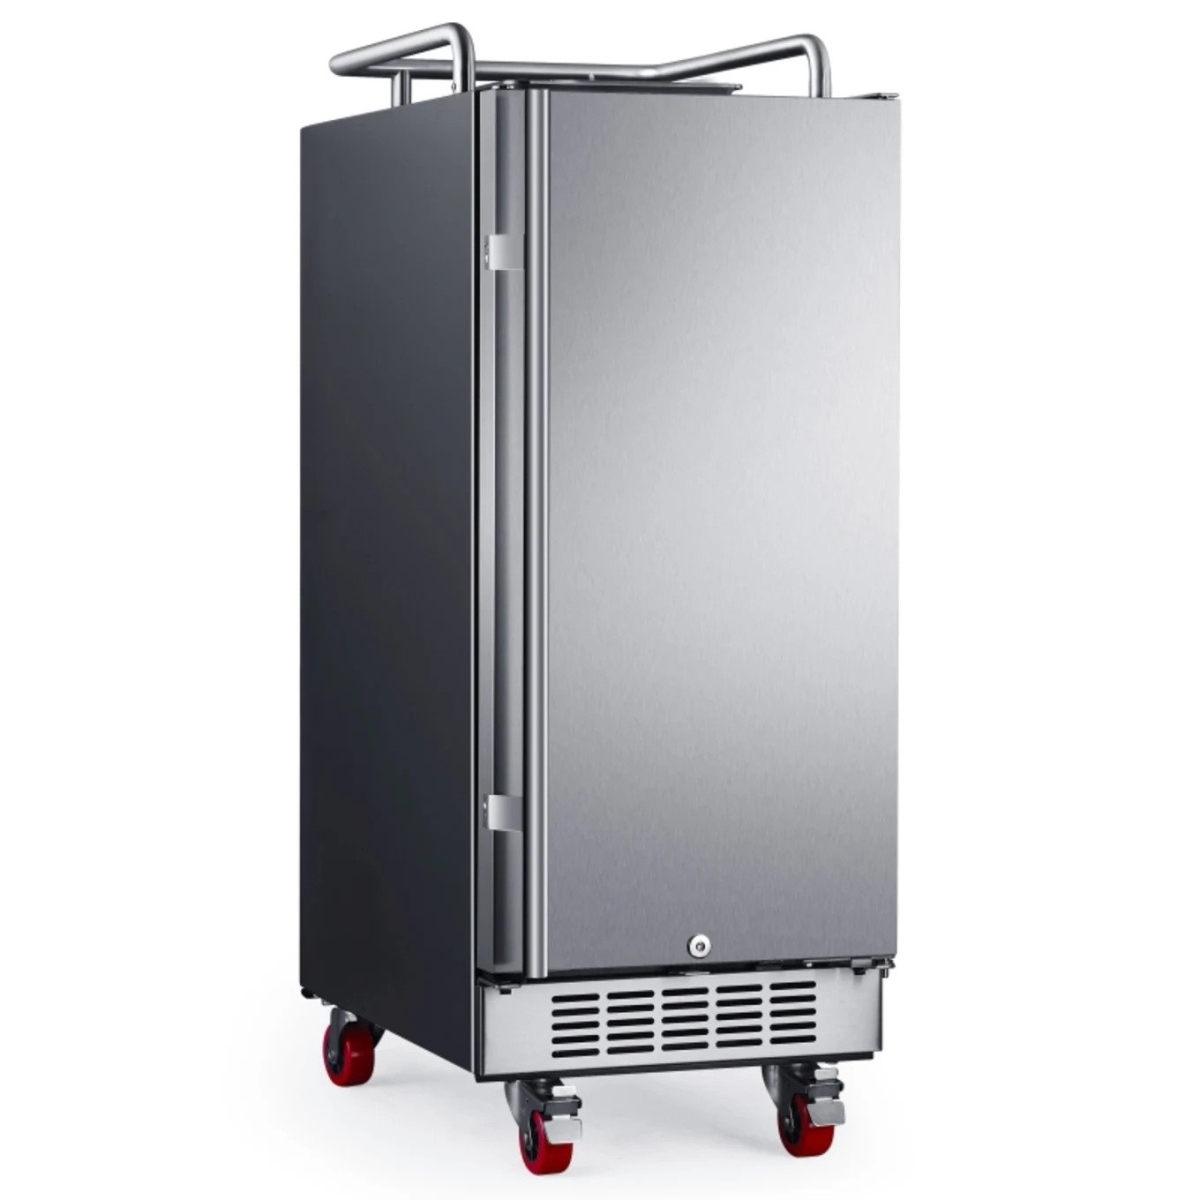 Picture of EdgeStar BR1500SS 15 in. Wide Kegerator Conversion Refrigerator with Forced Air Refrigeration, Stainless Steel